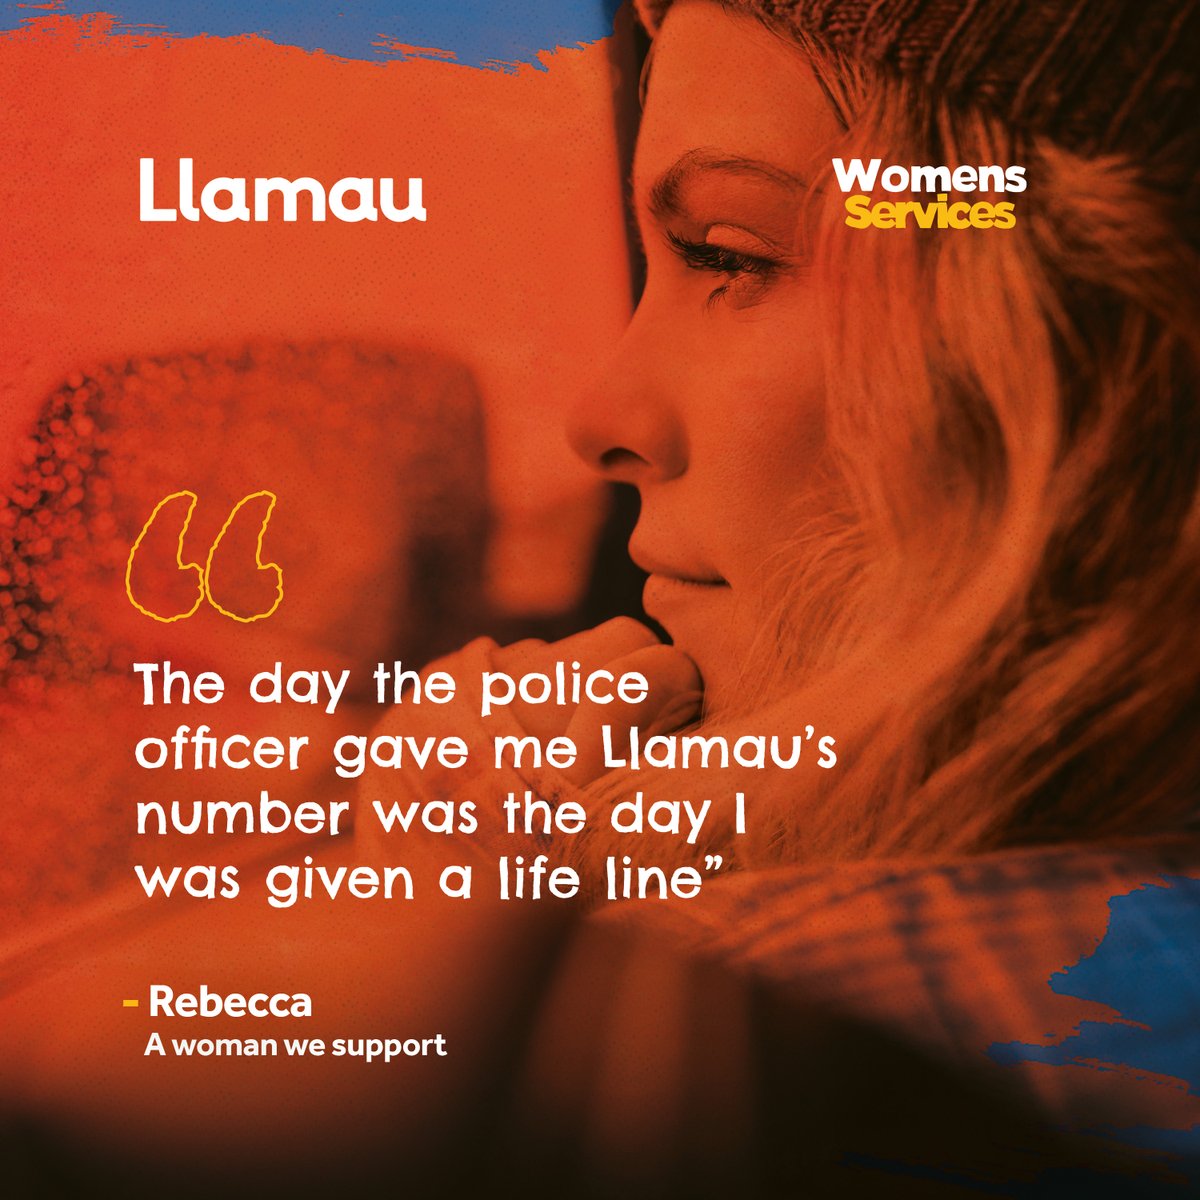 Did you know? Homelessness isn't just about living on the streets. Women may rely on friends, family, or shelters. It's crucial to support them before it's too late. Your help enables us at Llamau to reach out and offer assistance #EndHomelessness